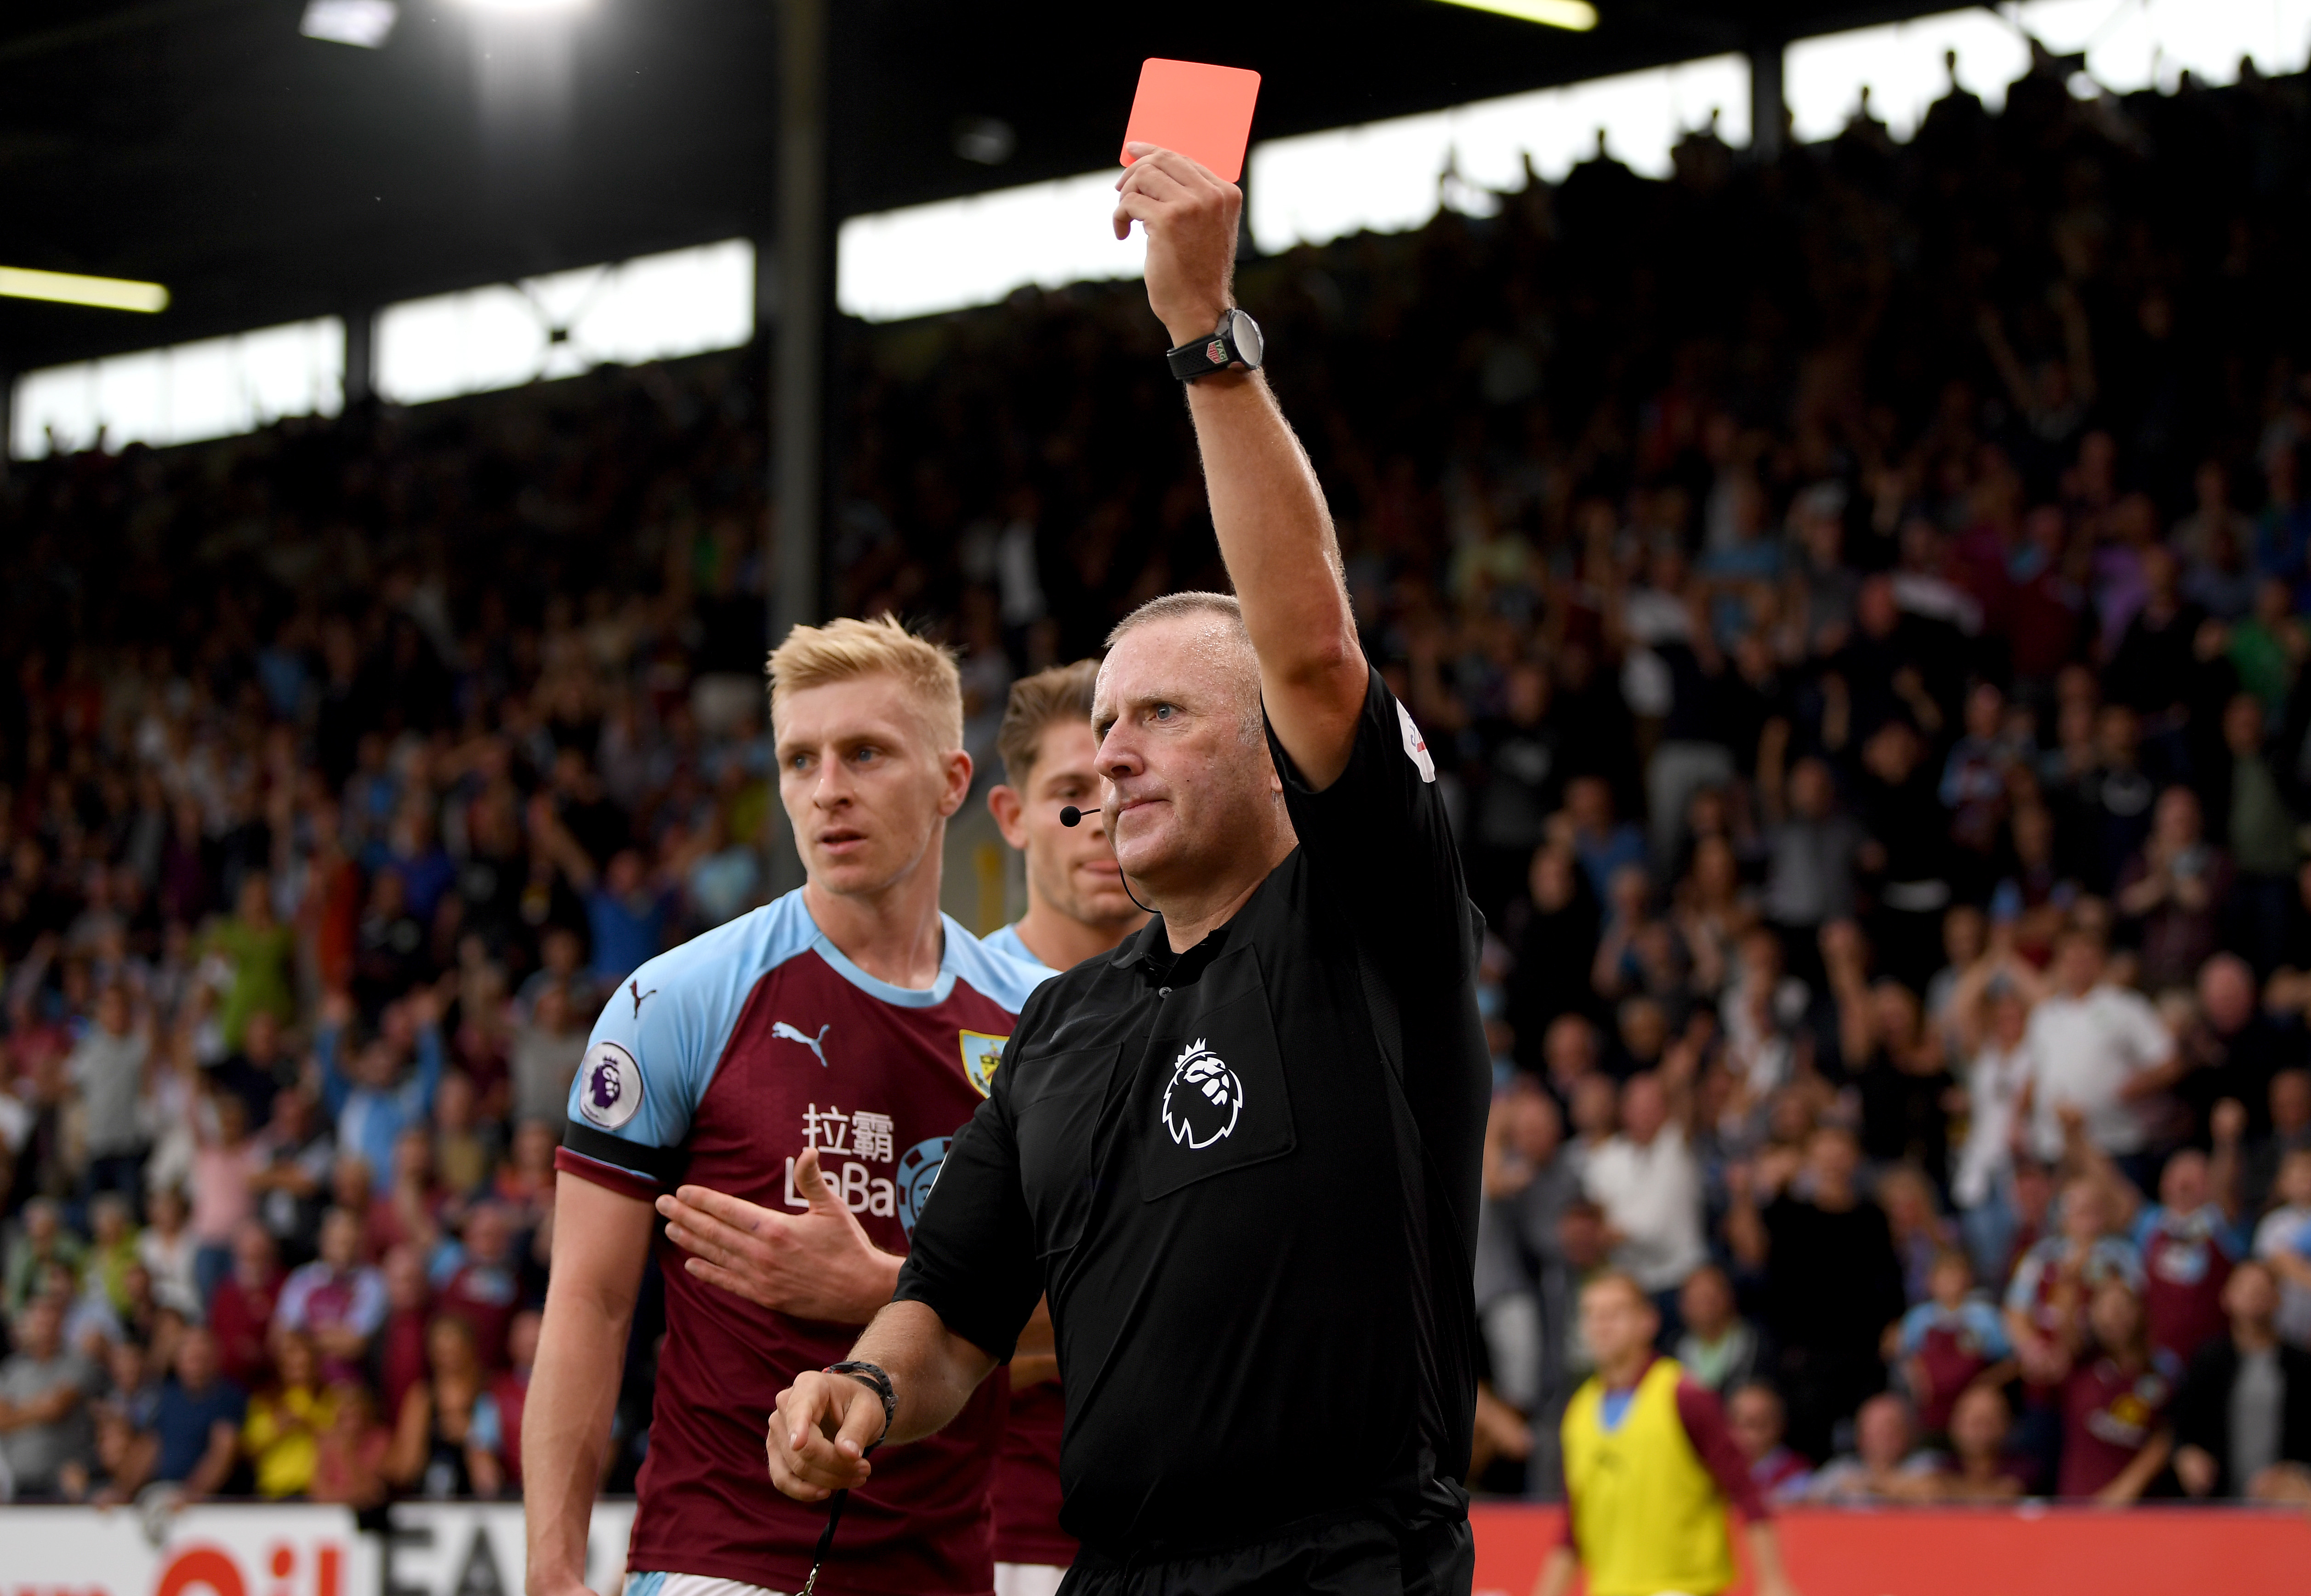 BURNLEY, ENGLAND - SEPTEMBER 02:  Referee Jonathan Moss shows a red card to Marcus Rashford of Manchester United (not pictured) during the Premier League match between Burnley FC and Manchester United at Turf Moor on September 2, 2018 in Burnley, United Kingdom.  (Photo by Shaun Botterill/Getty Images)